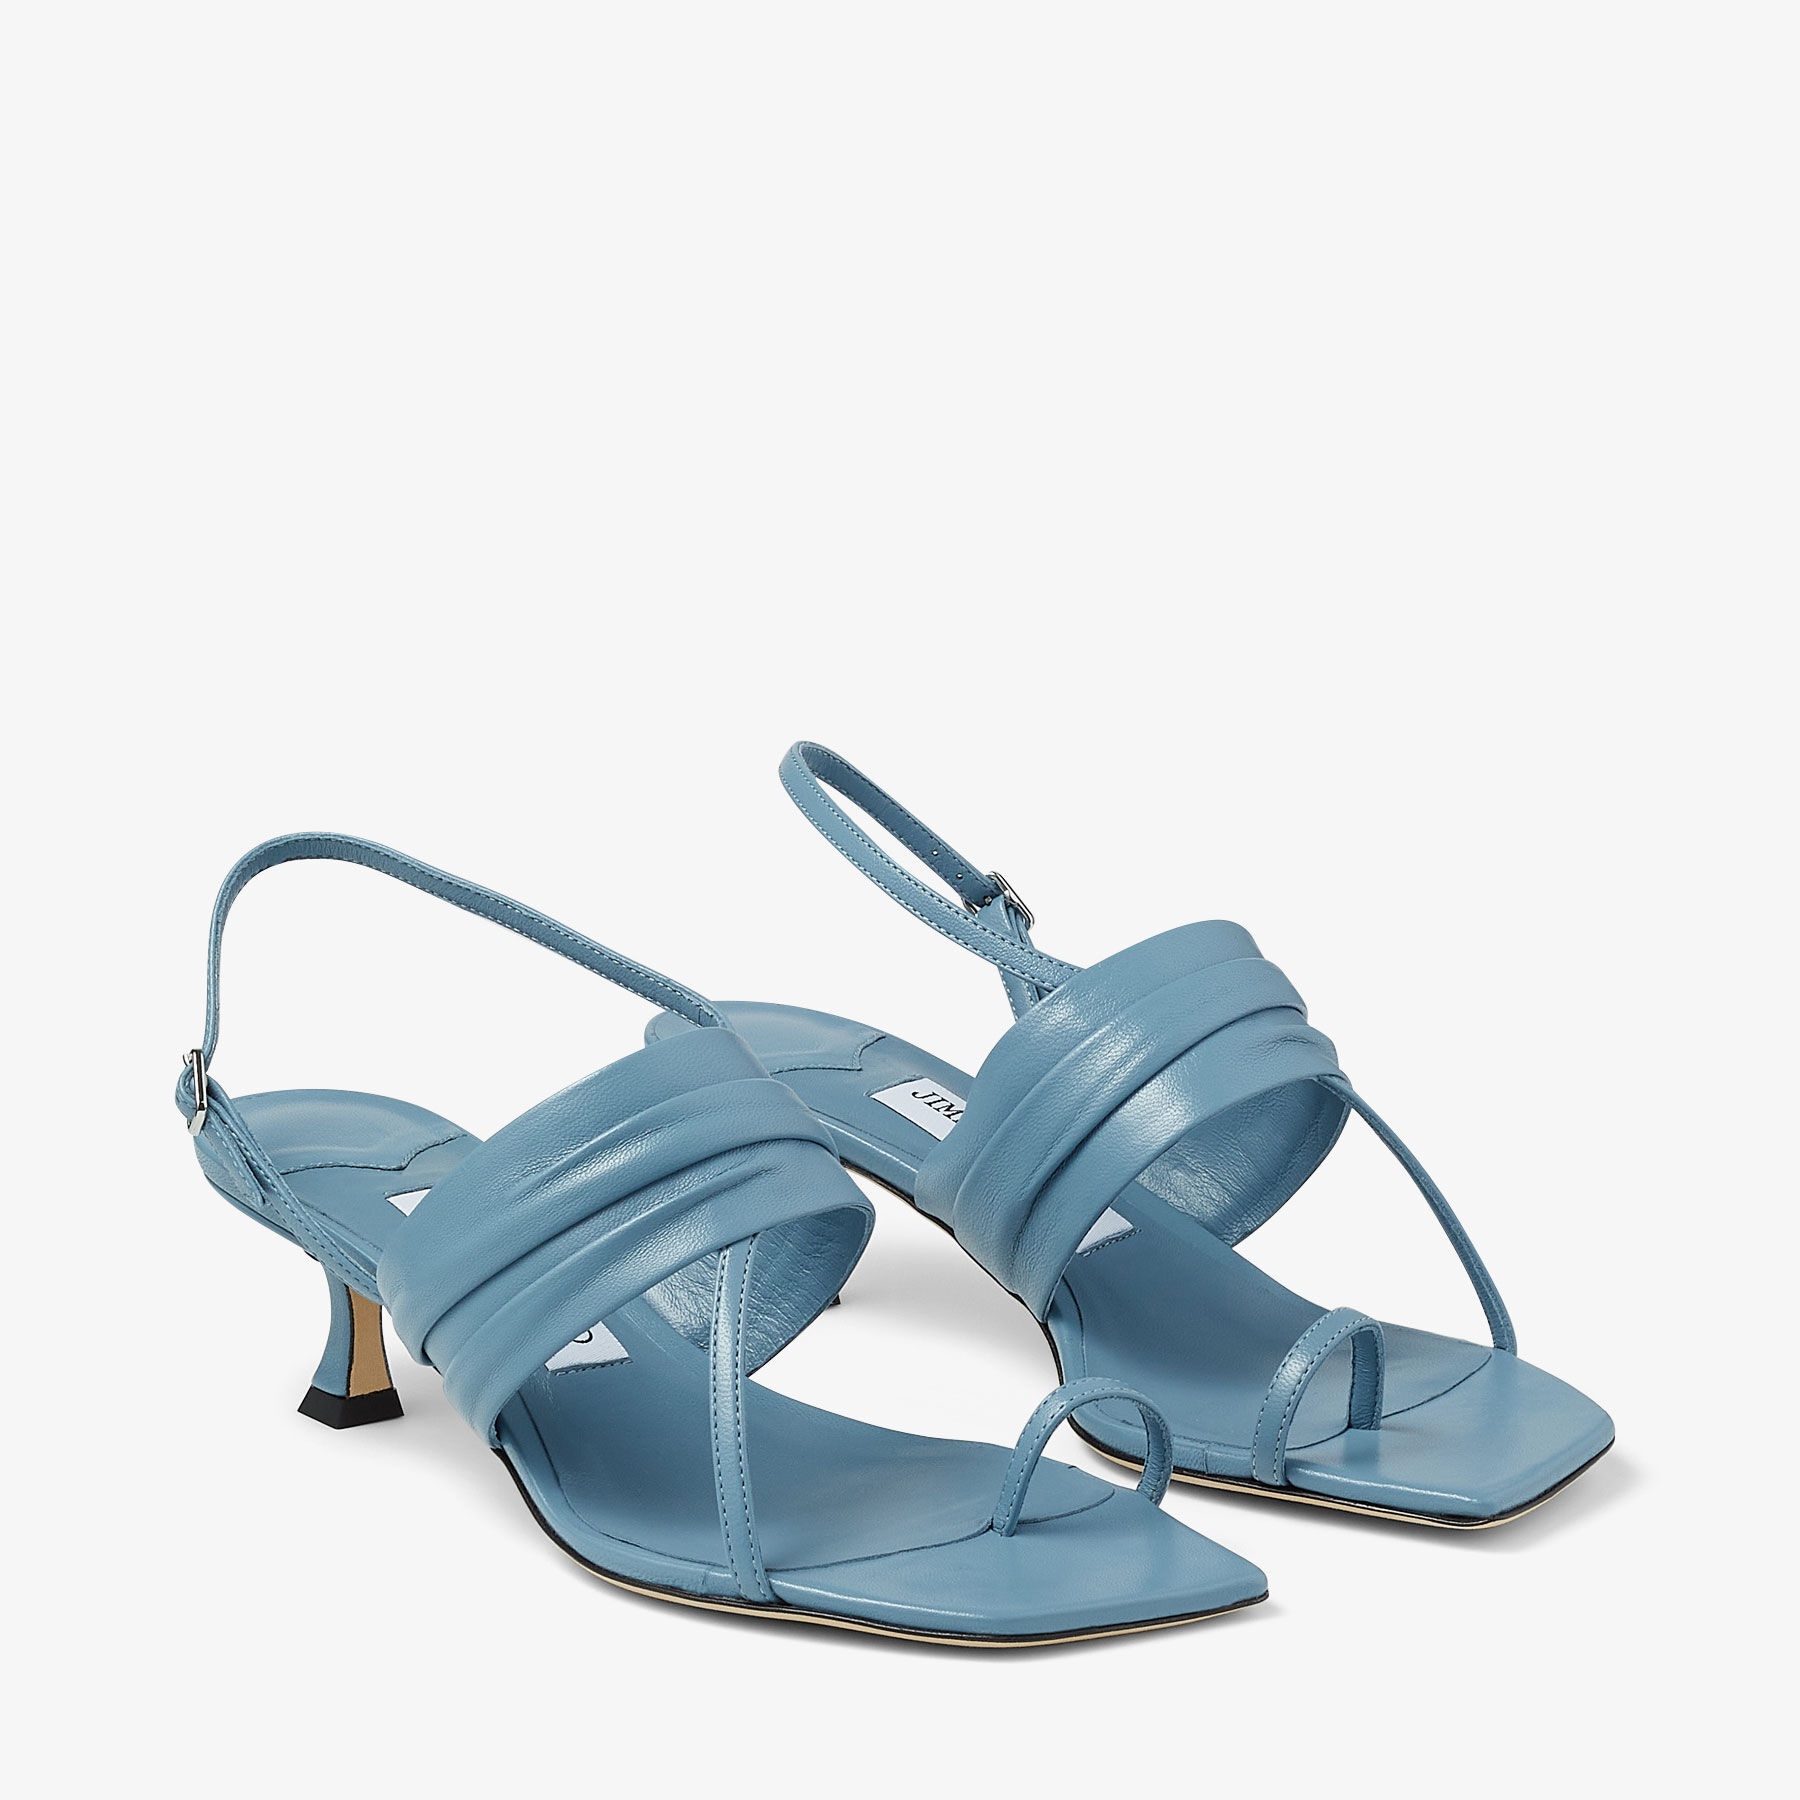 Beziers 50
Smoky Blue Nappa Leather Sandals - 3